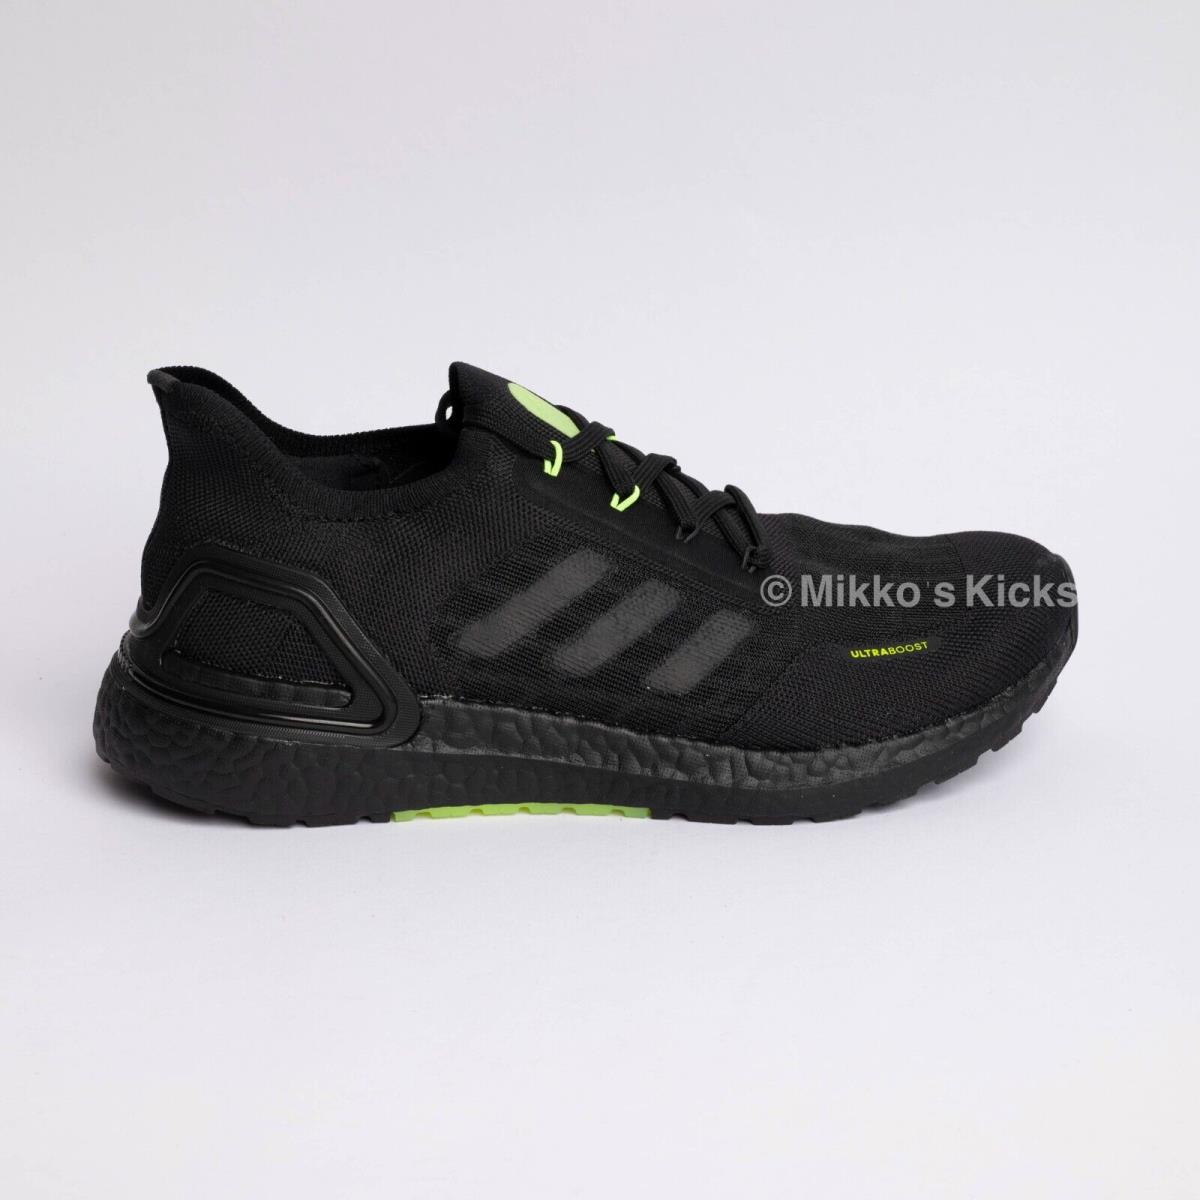 US Size 8 - Adidas Ultraboost Summer.rdy Low-top Sneakers - Black/Volt Green